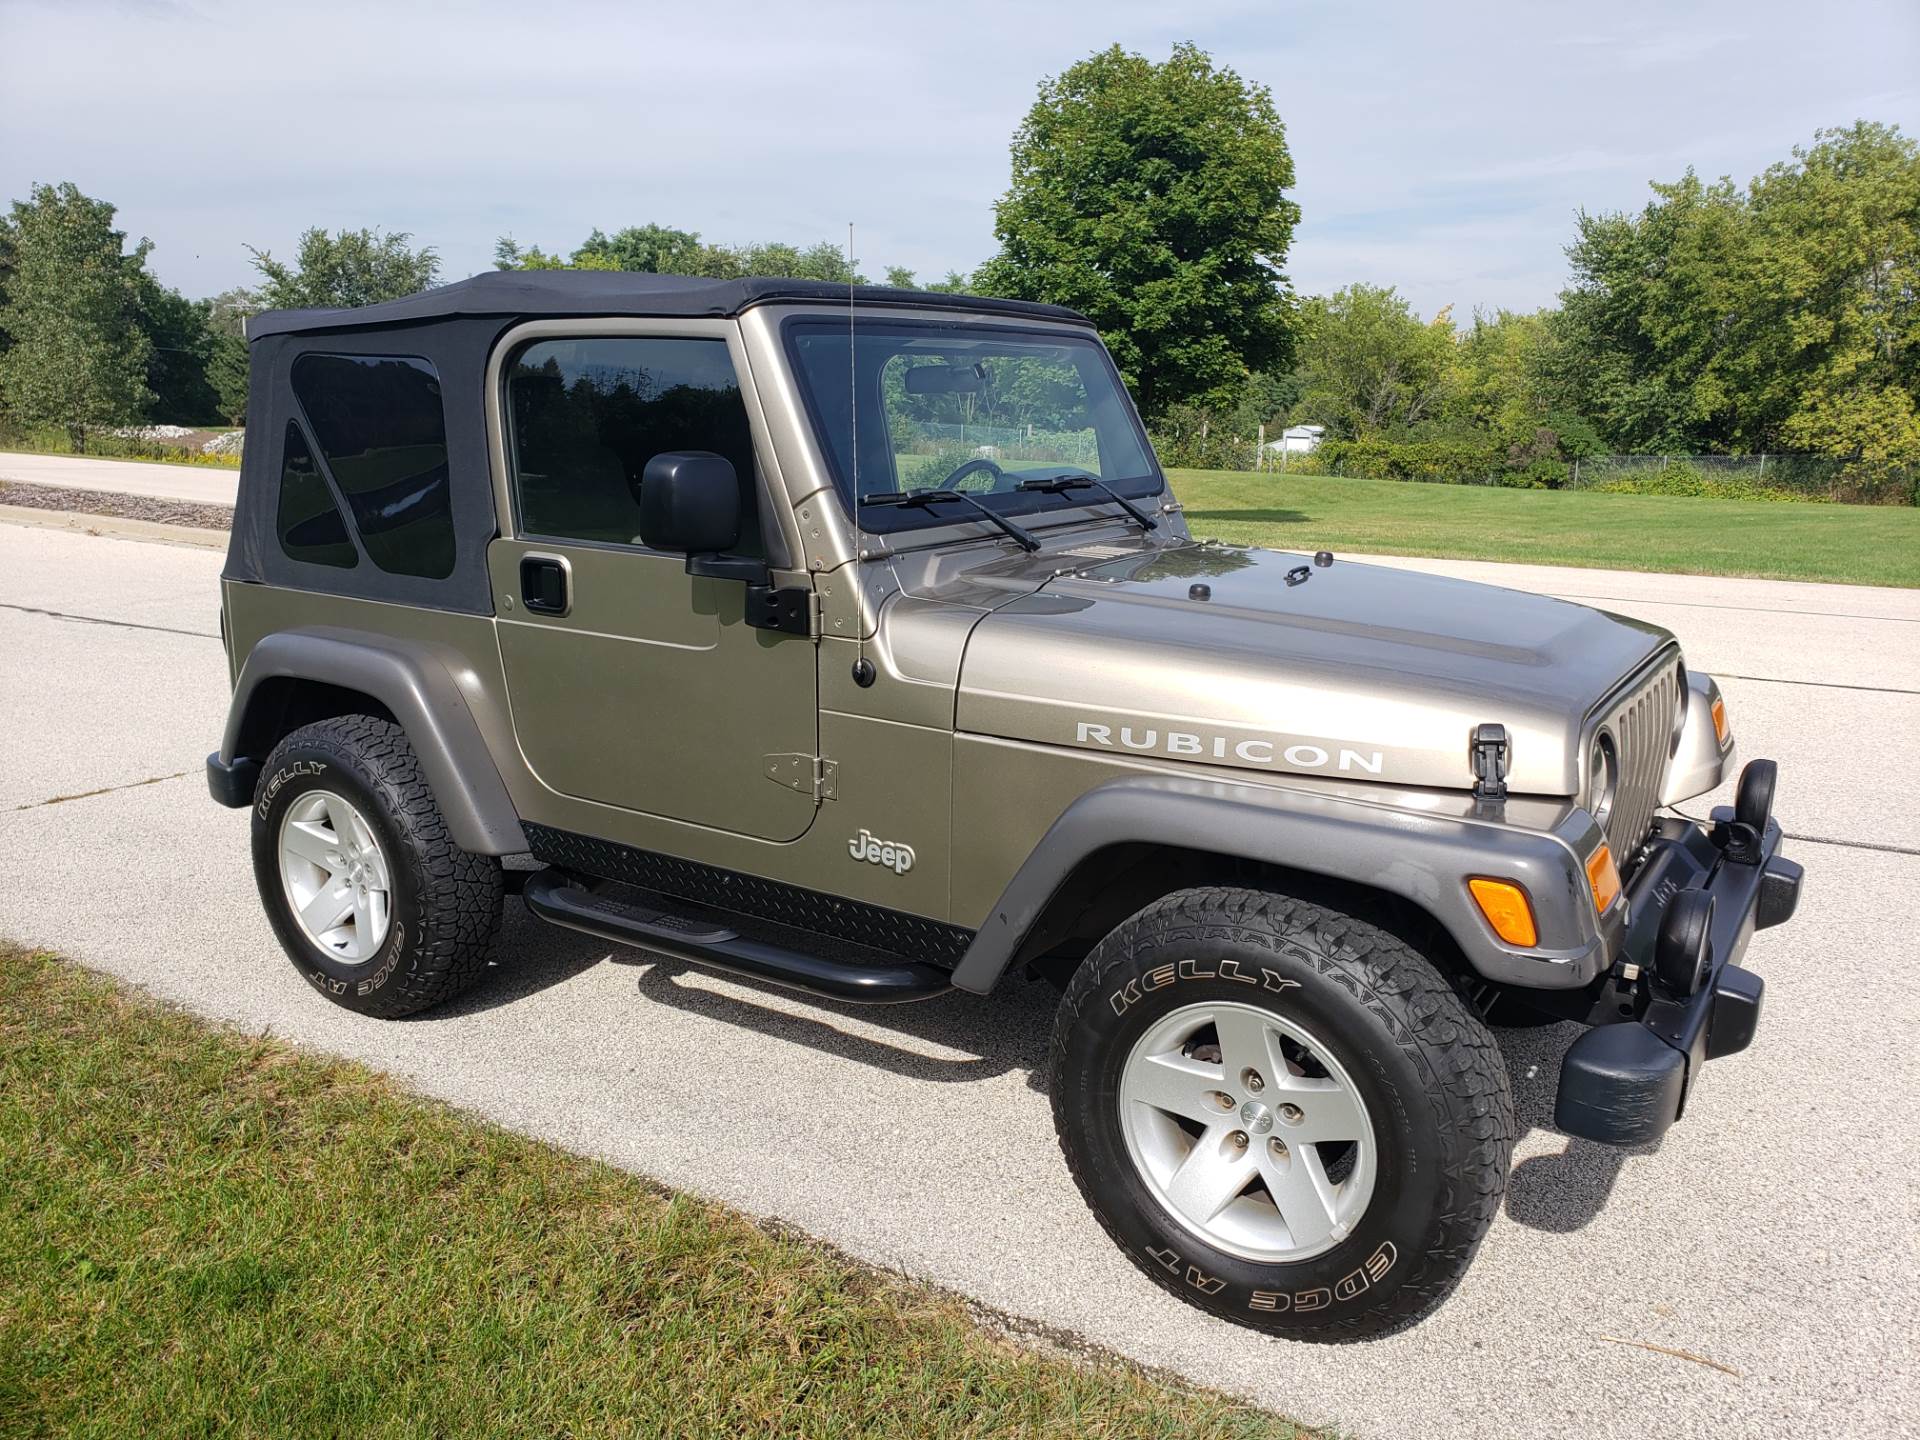 2005 Jeep Wrangler Rubicon 4WD 2dr SUV in Big Bend, Wisconsin - Photo 2